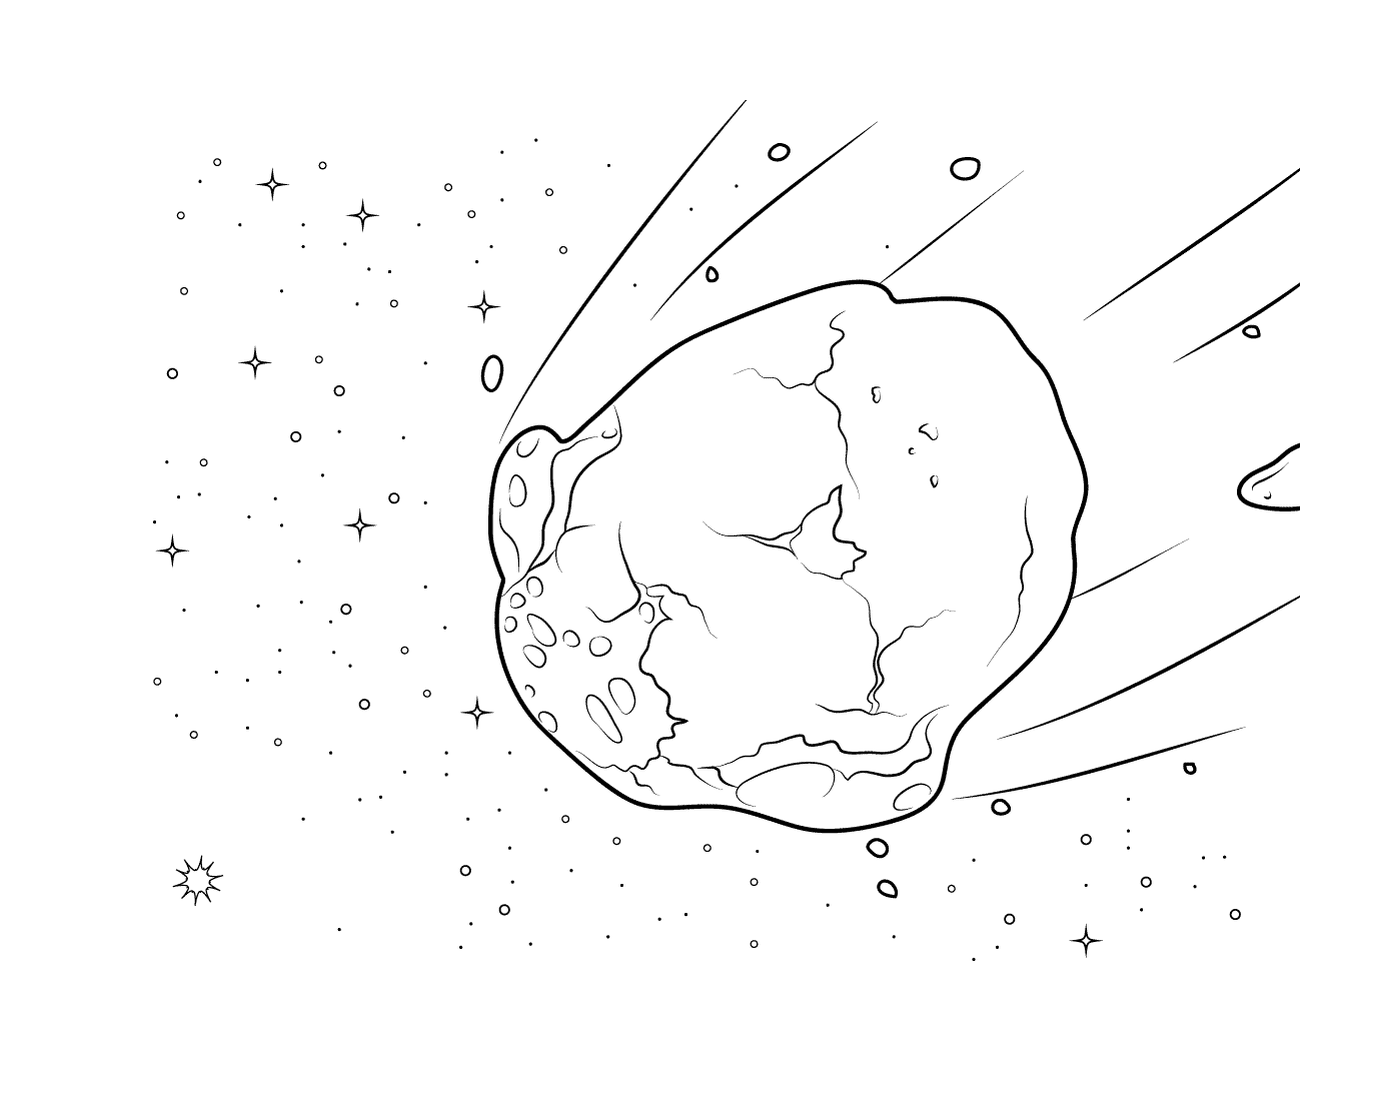  Asteroid in the sky 